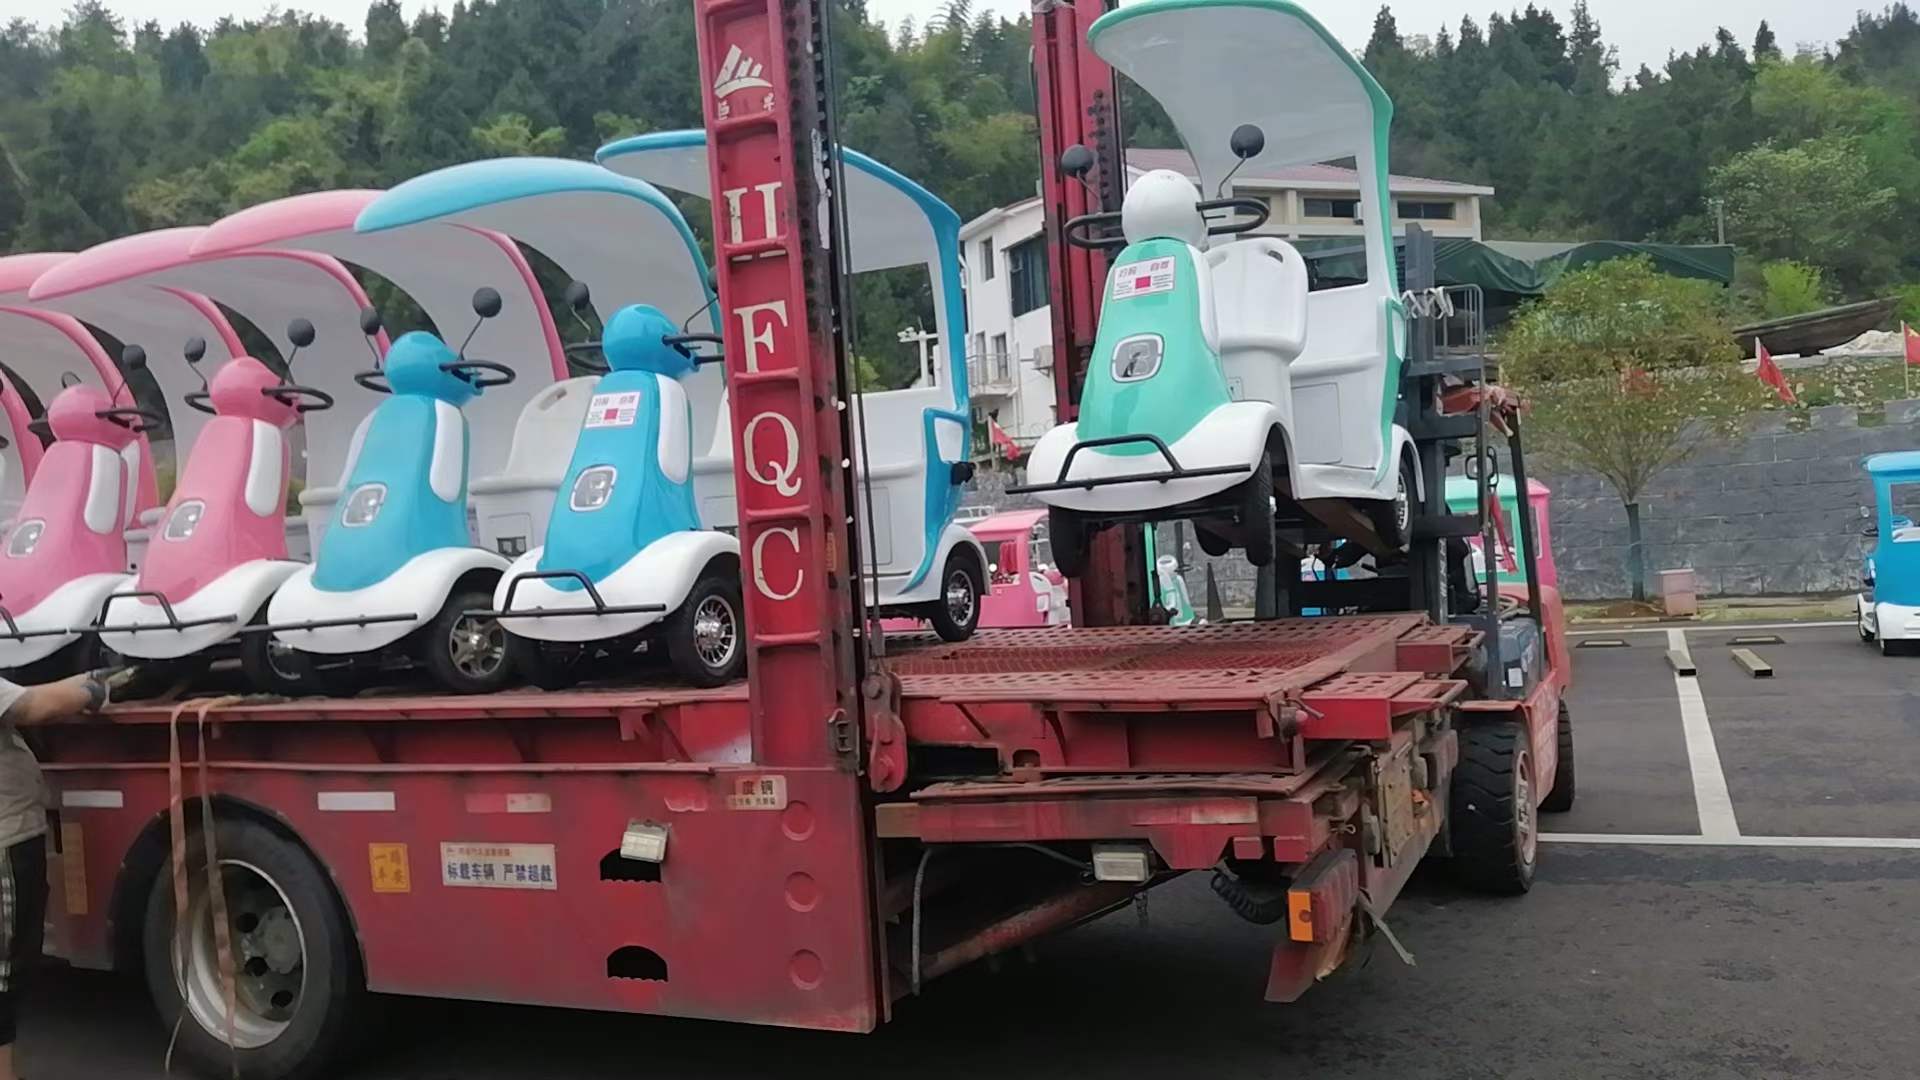 Our 2 Seater Mobility Scooters Are Loaded In A Long Truck